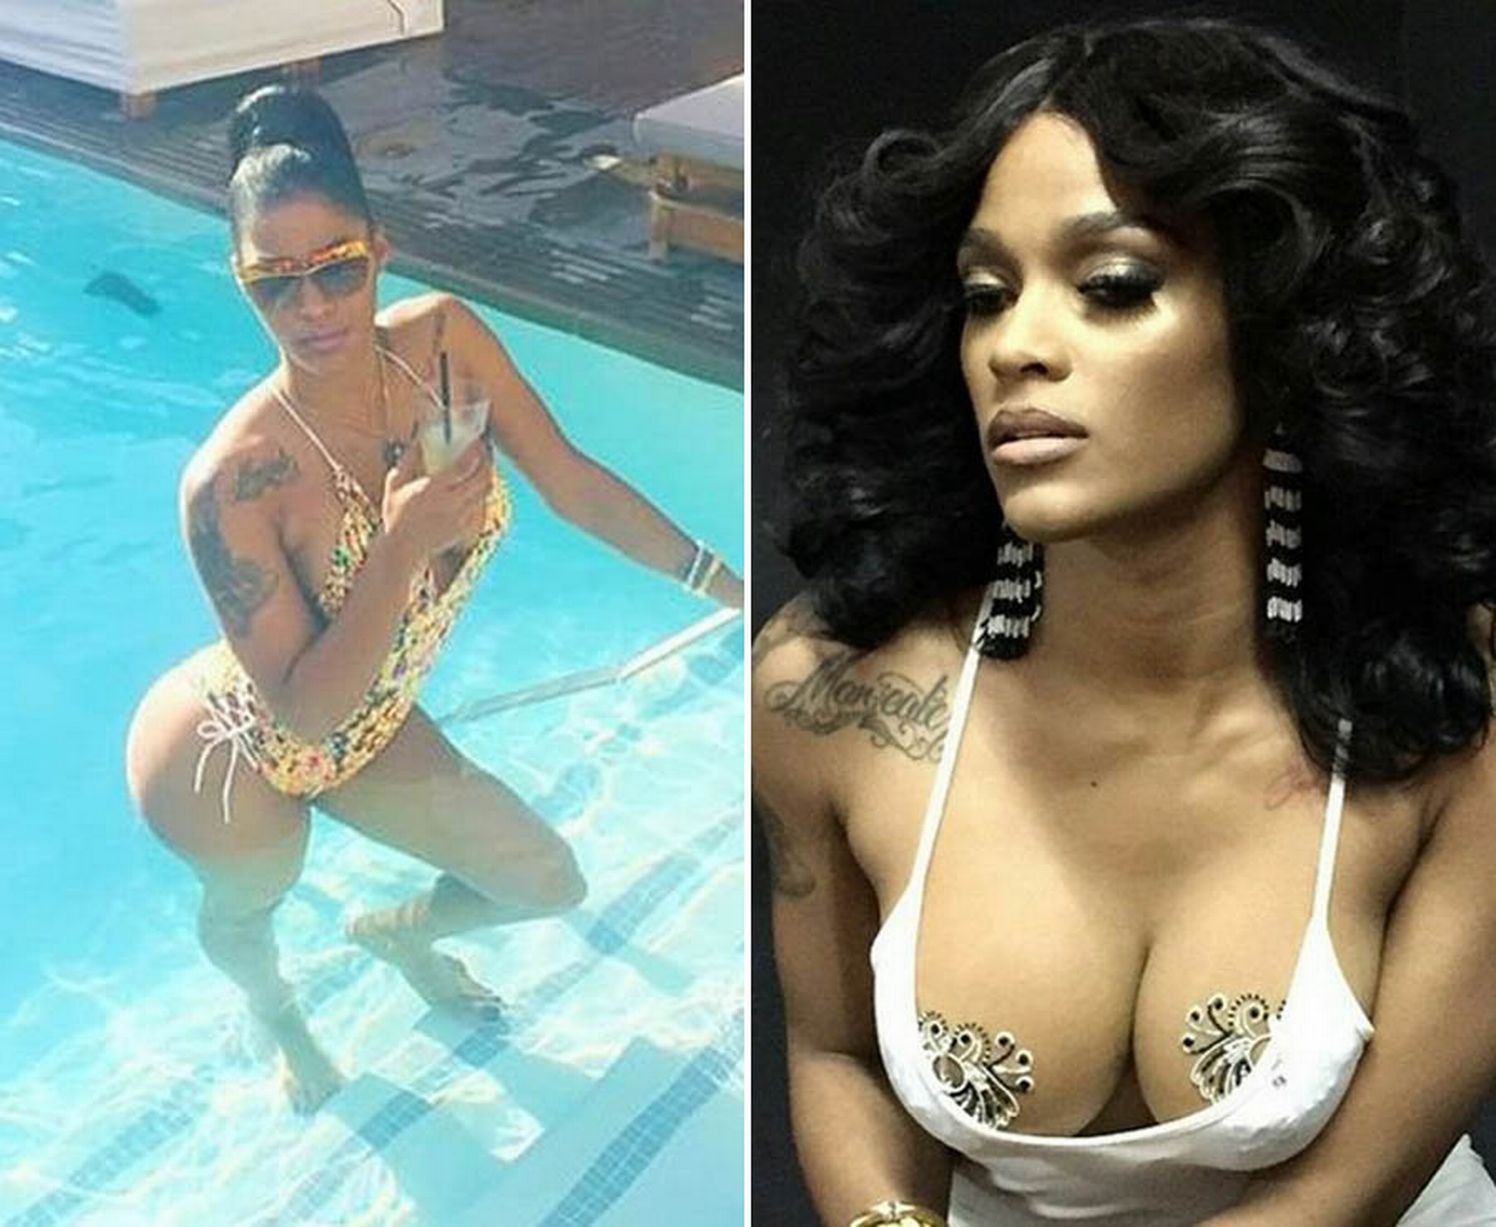 cleve hughes recommends joseline hernandez having sex pic